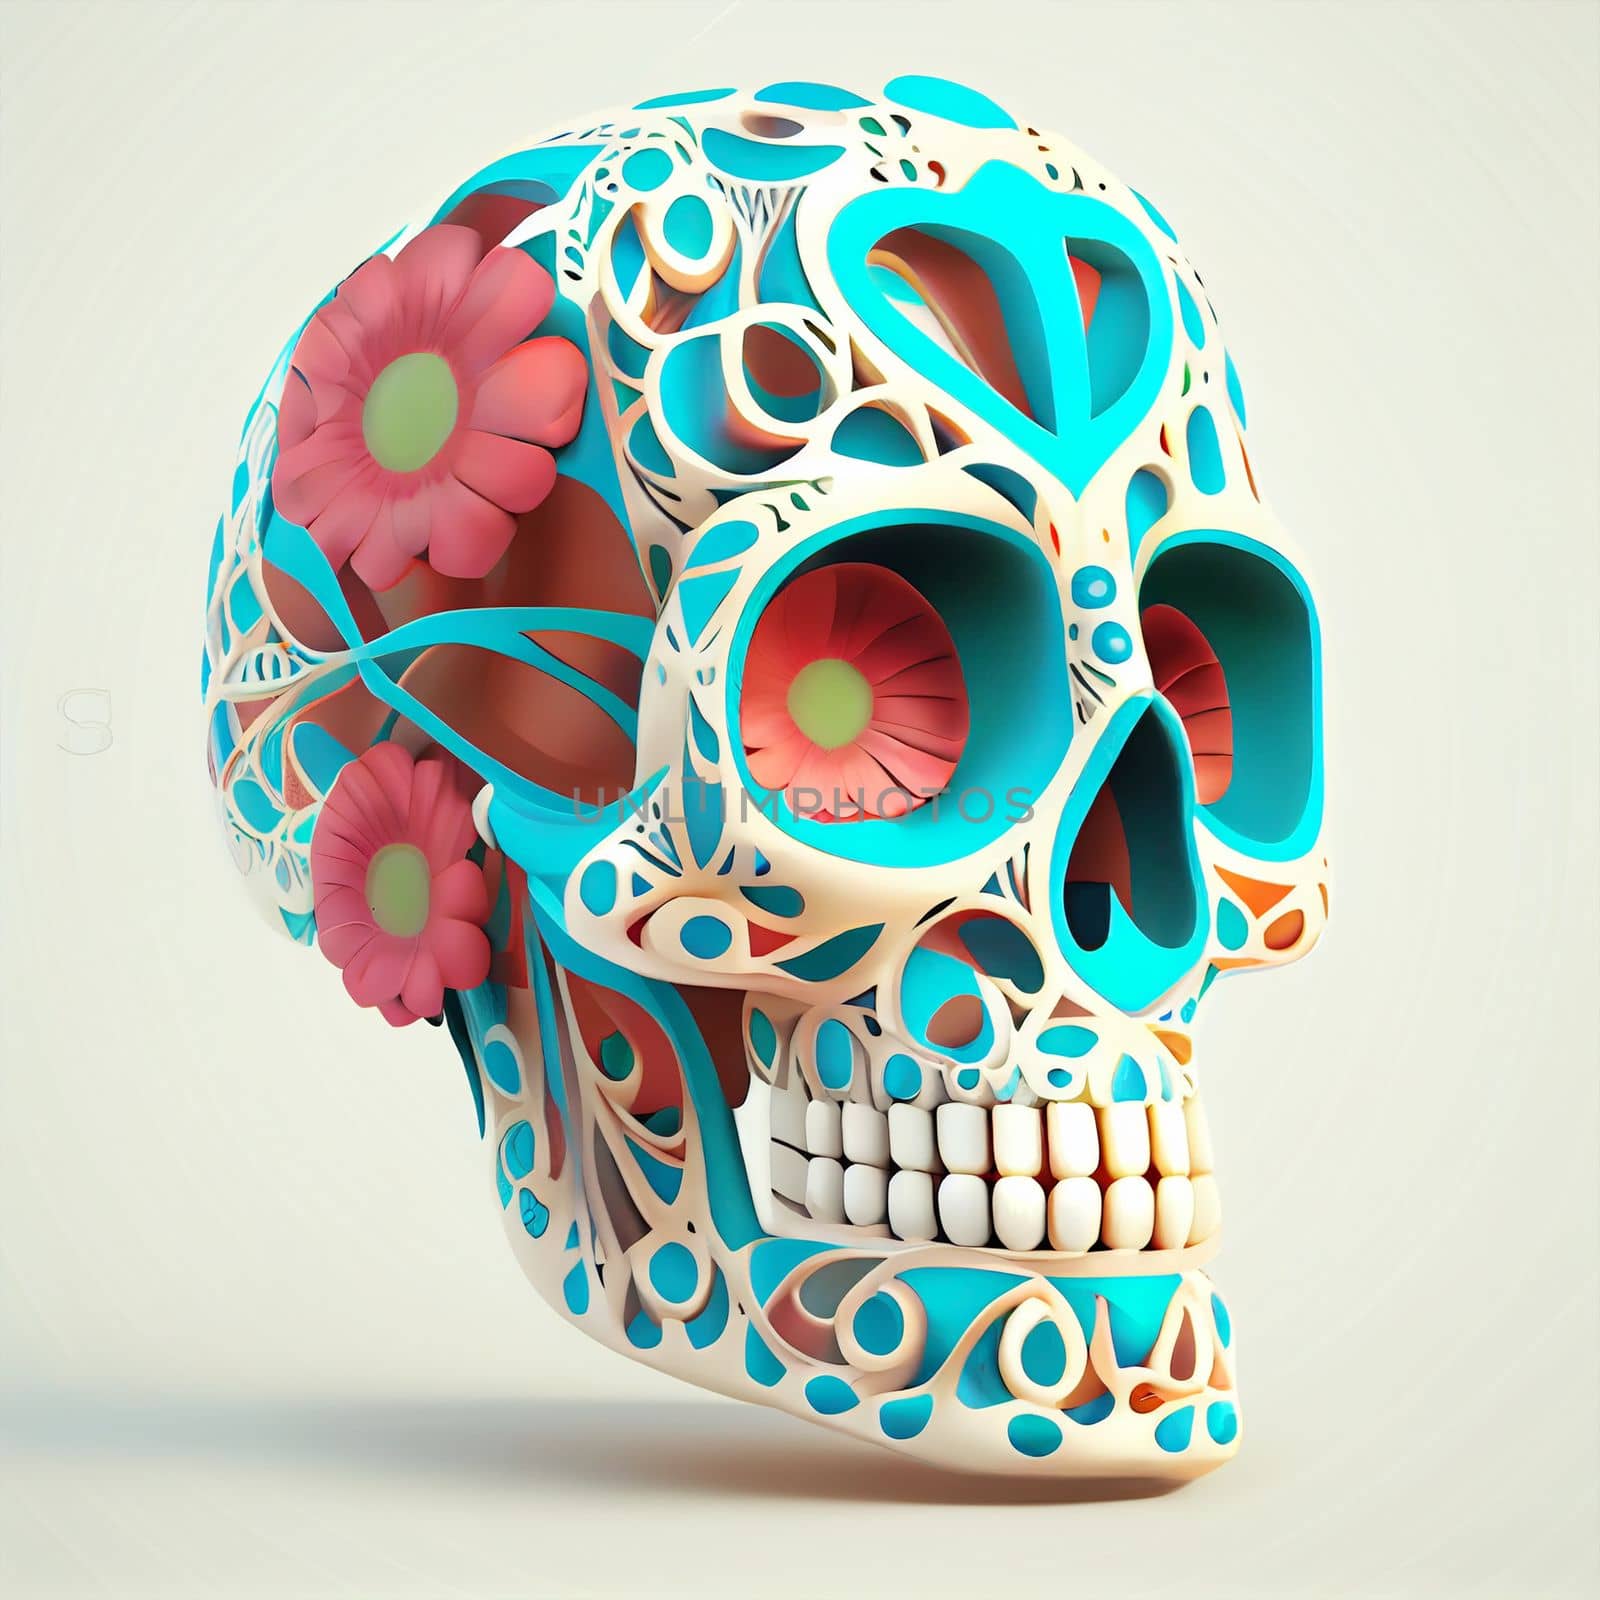 Traditional realistic Calavera, Sugar Skull decorated with flowers. The day of the dead, Dia de los Muertos celebration background. 3D illustration. by lucia_fox